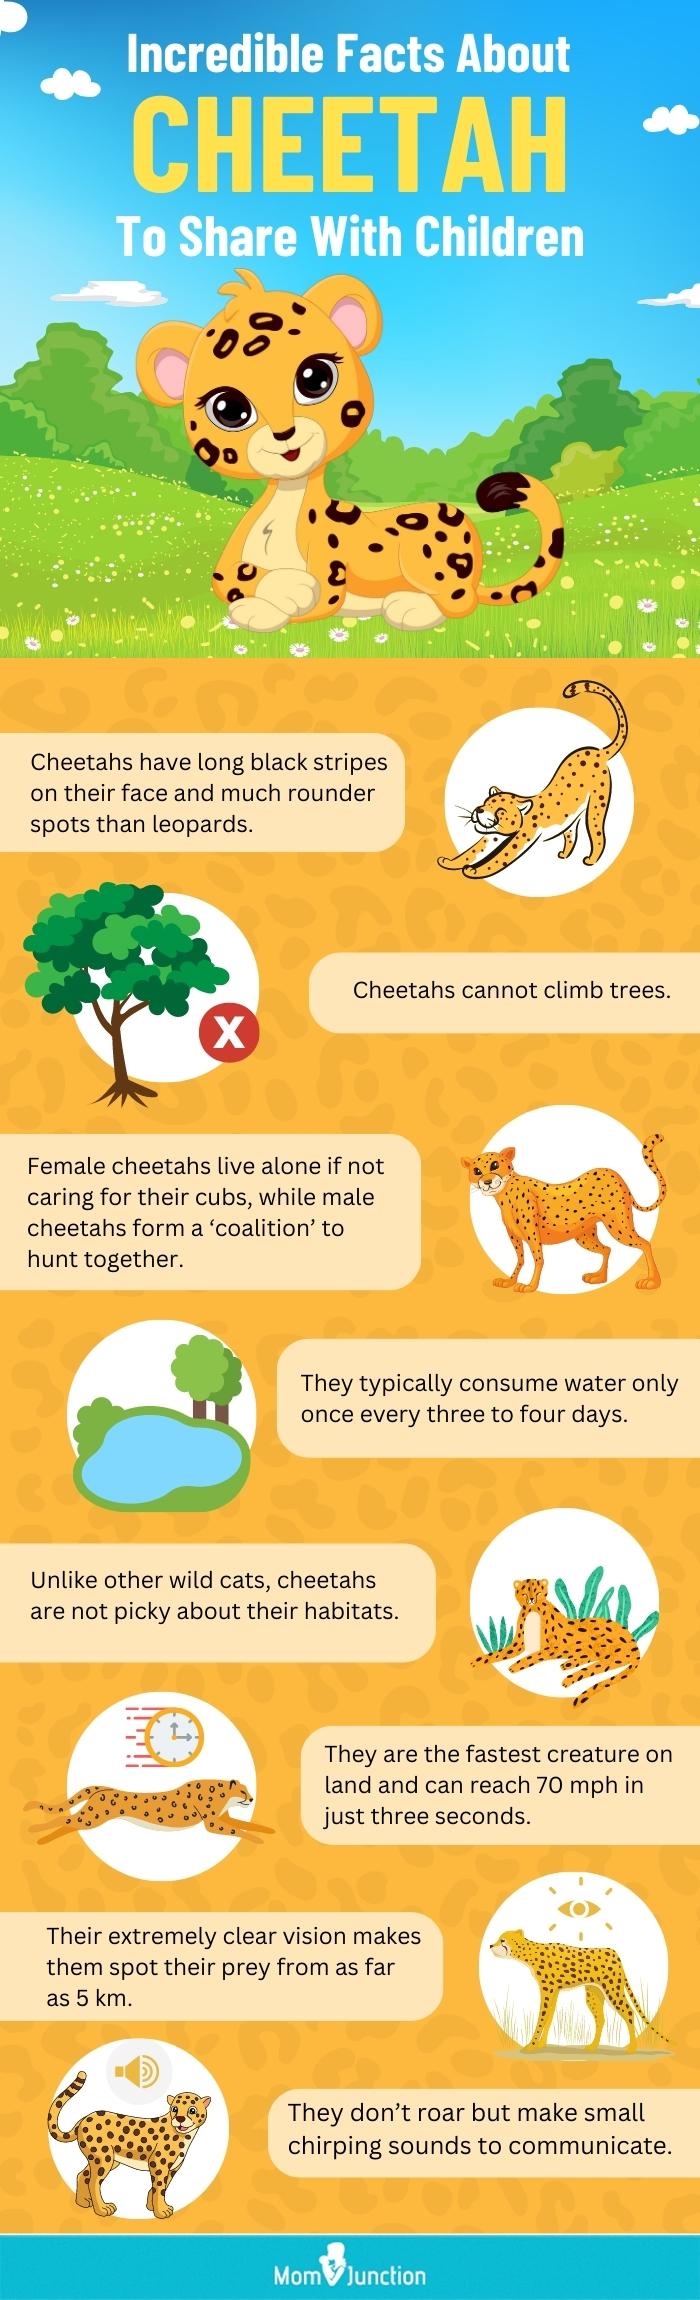 incredible facts about cheetah to share with children (infographic)